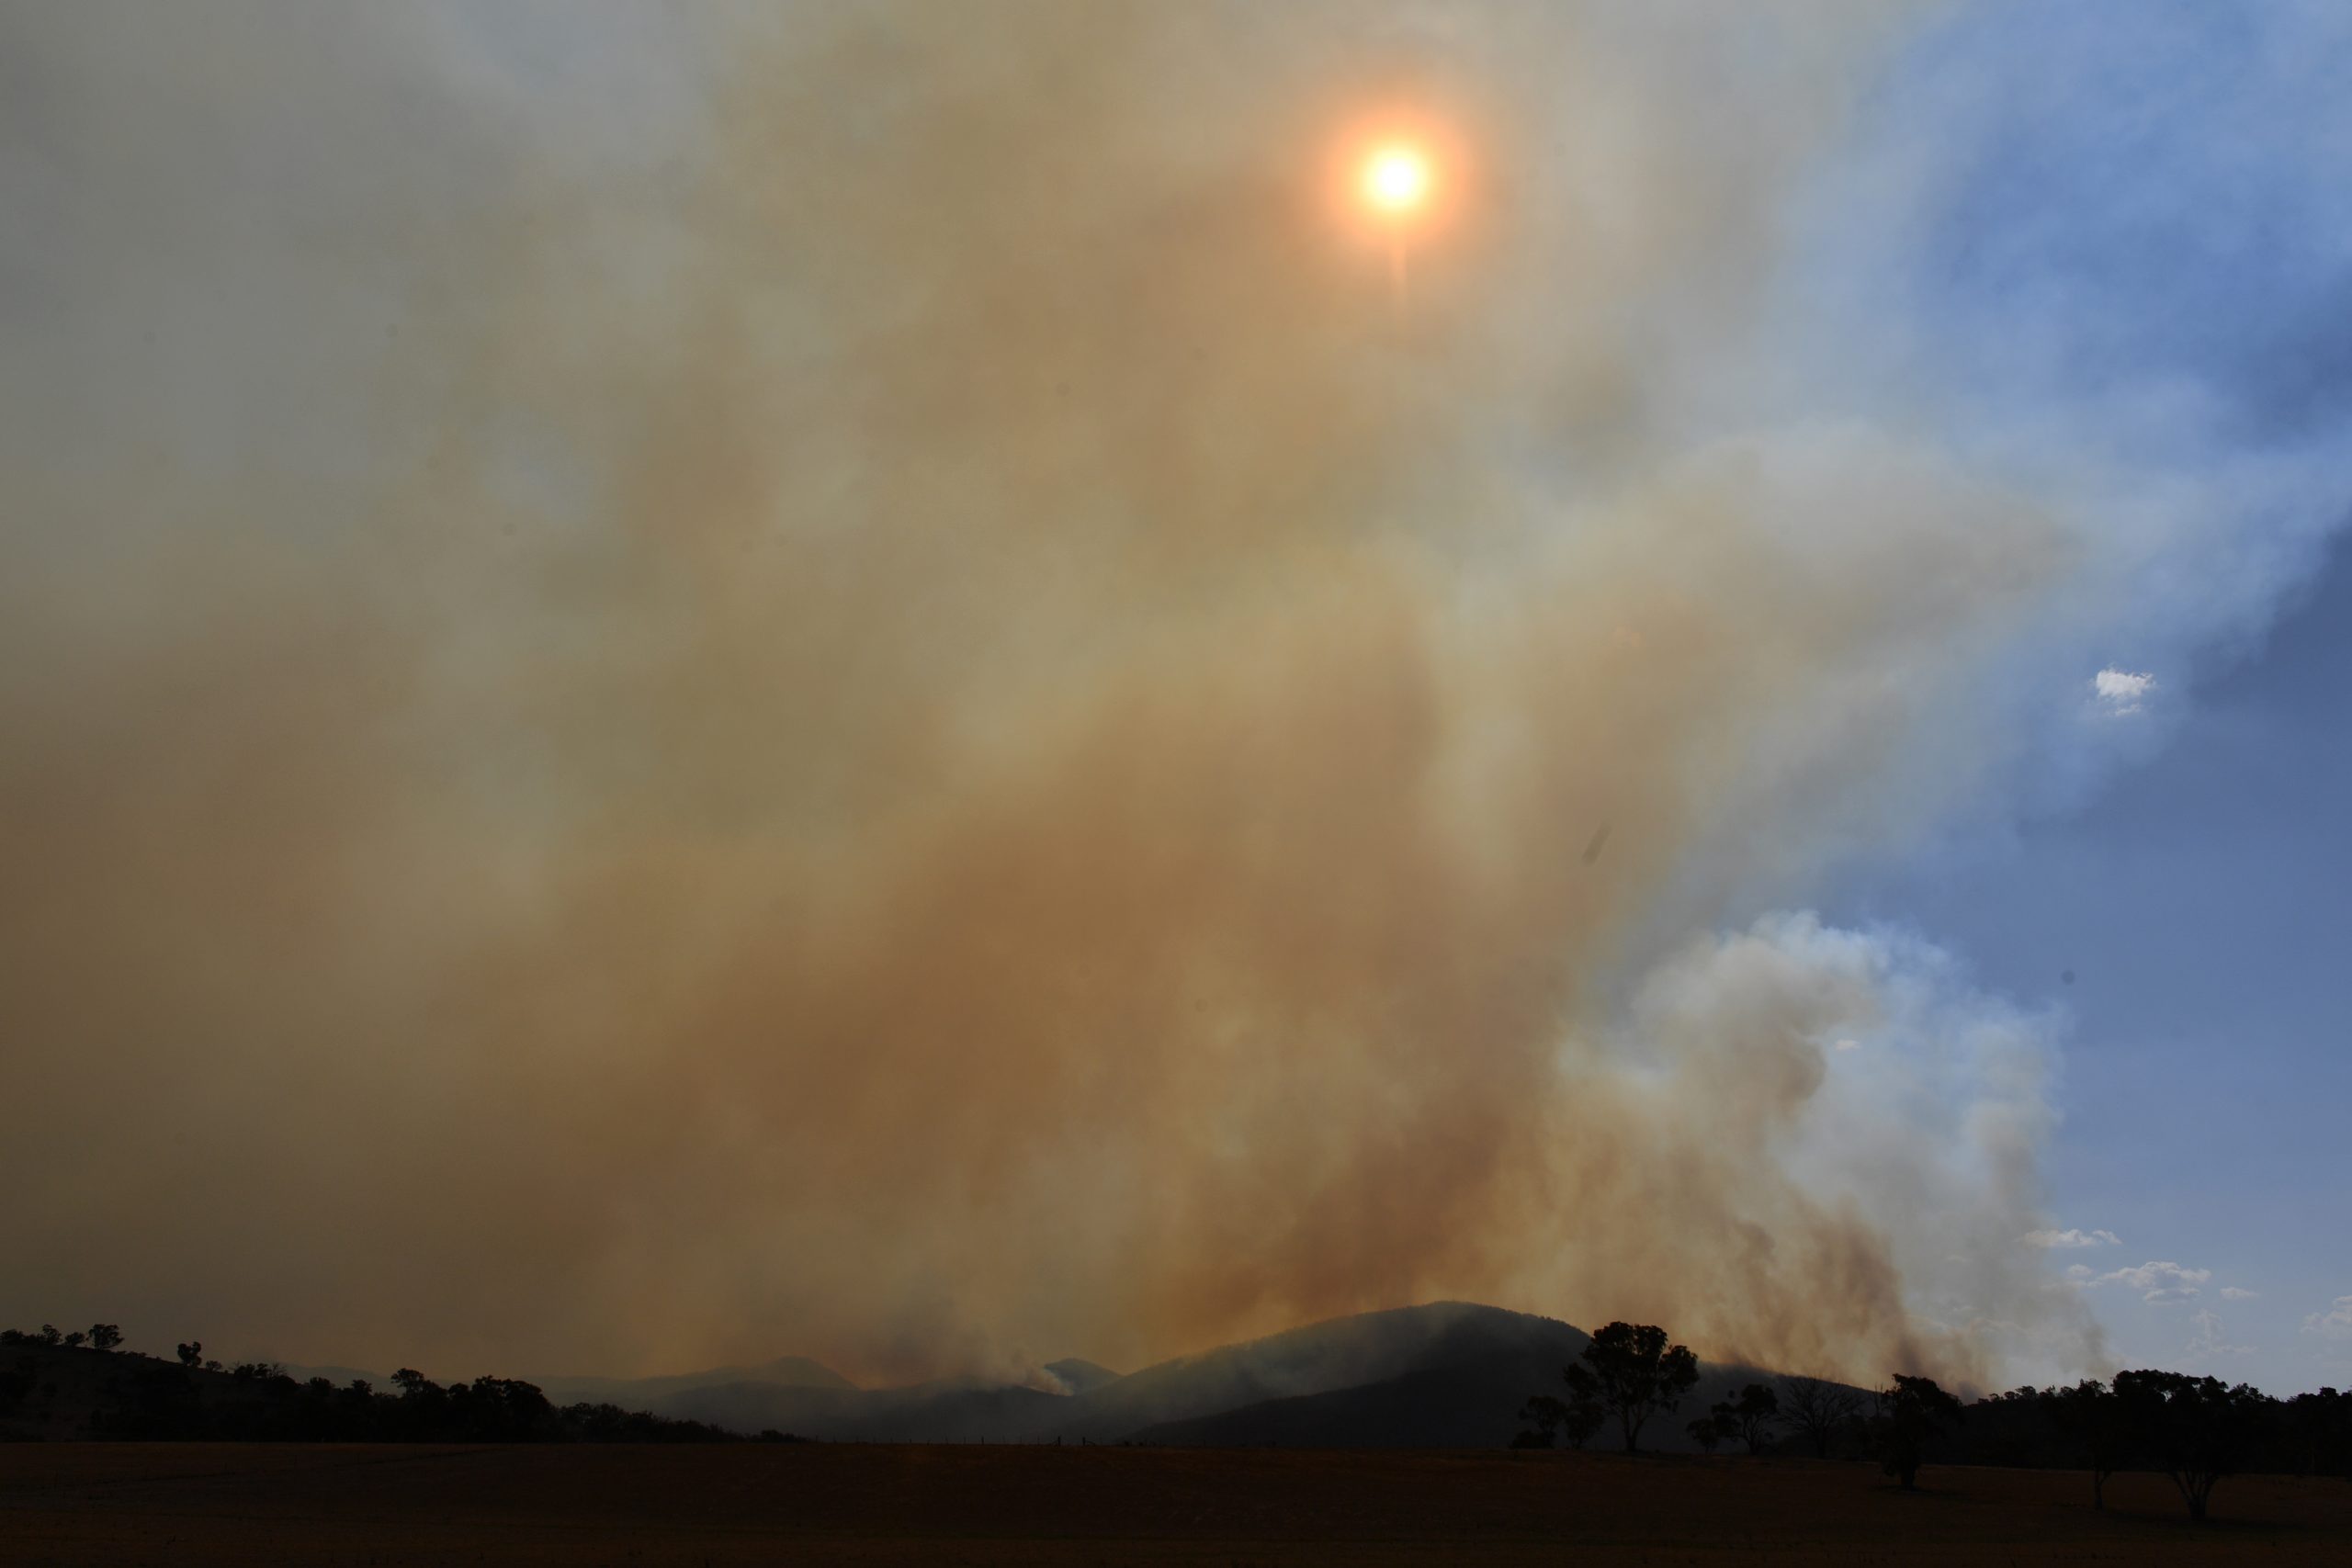 epa08180798 Smoke billows from a bushfire near the town of Tharwa, Australian Capital Territory, Australia, 31 January 2020. Authorities in the Australian Capital Territory have declared a state of emergency as fire burn near Canberra.  EPA/MICK TSIKAS  AUSTRALIA AND NEW ZEALAND OUT